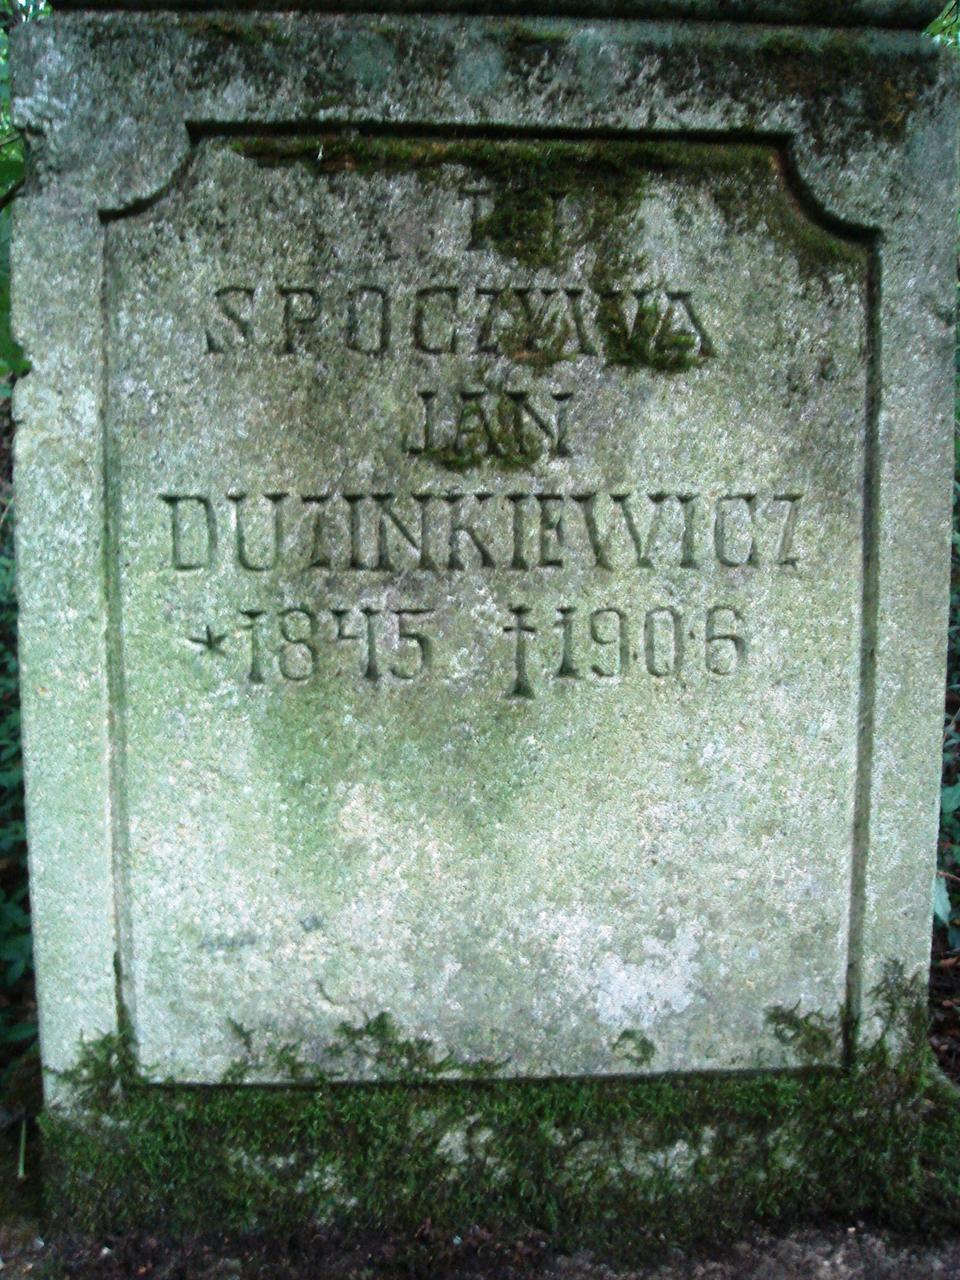 Tombstone of Jan Duzinkevich, cemetery in Puzniki, state from 2008